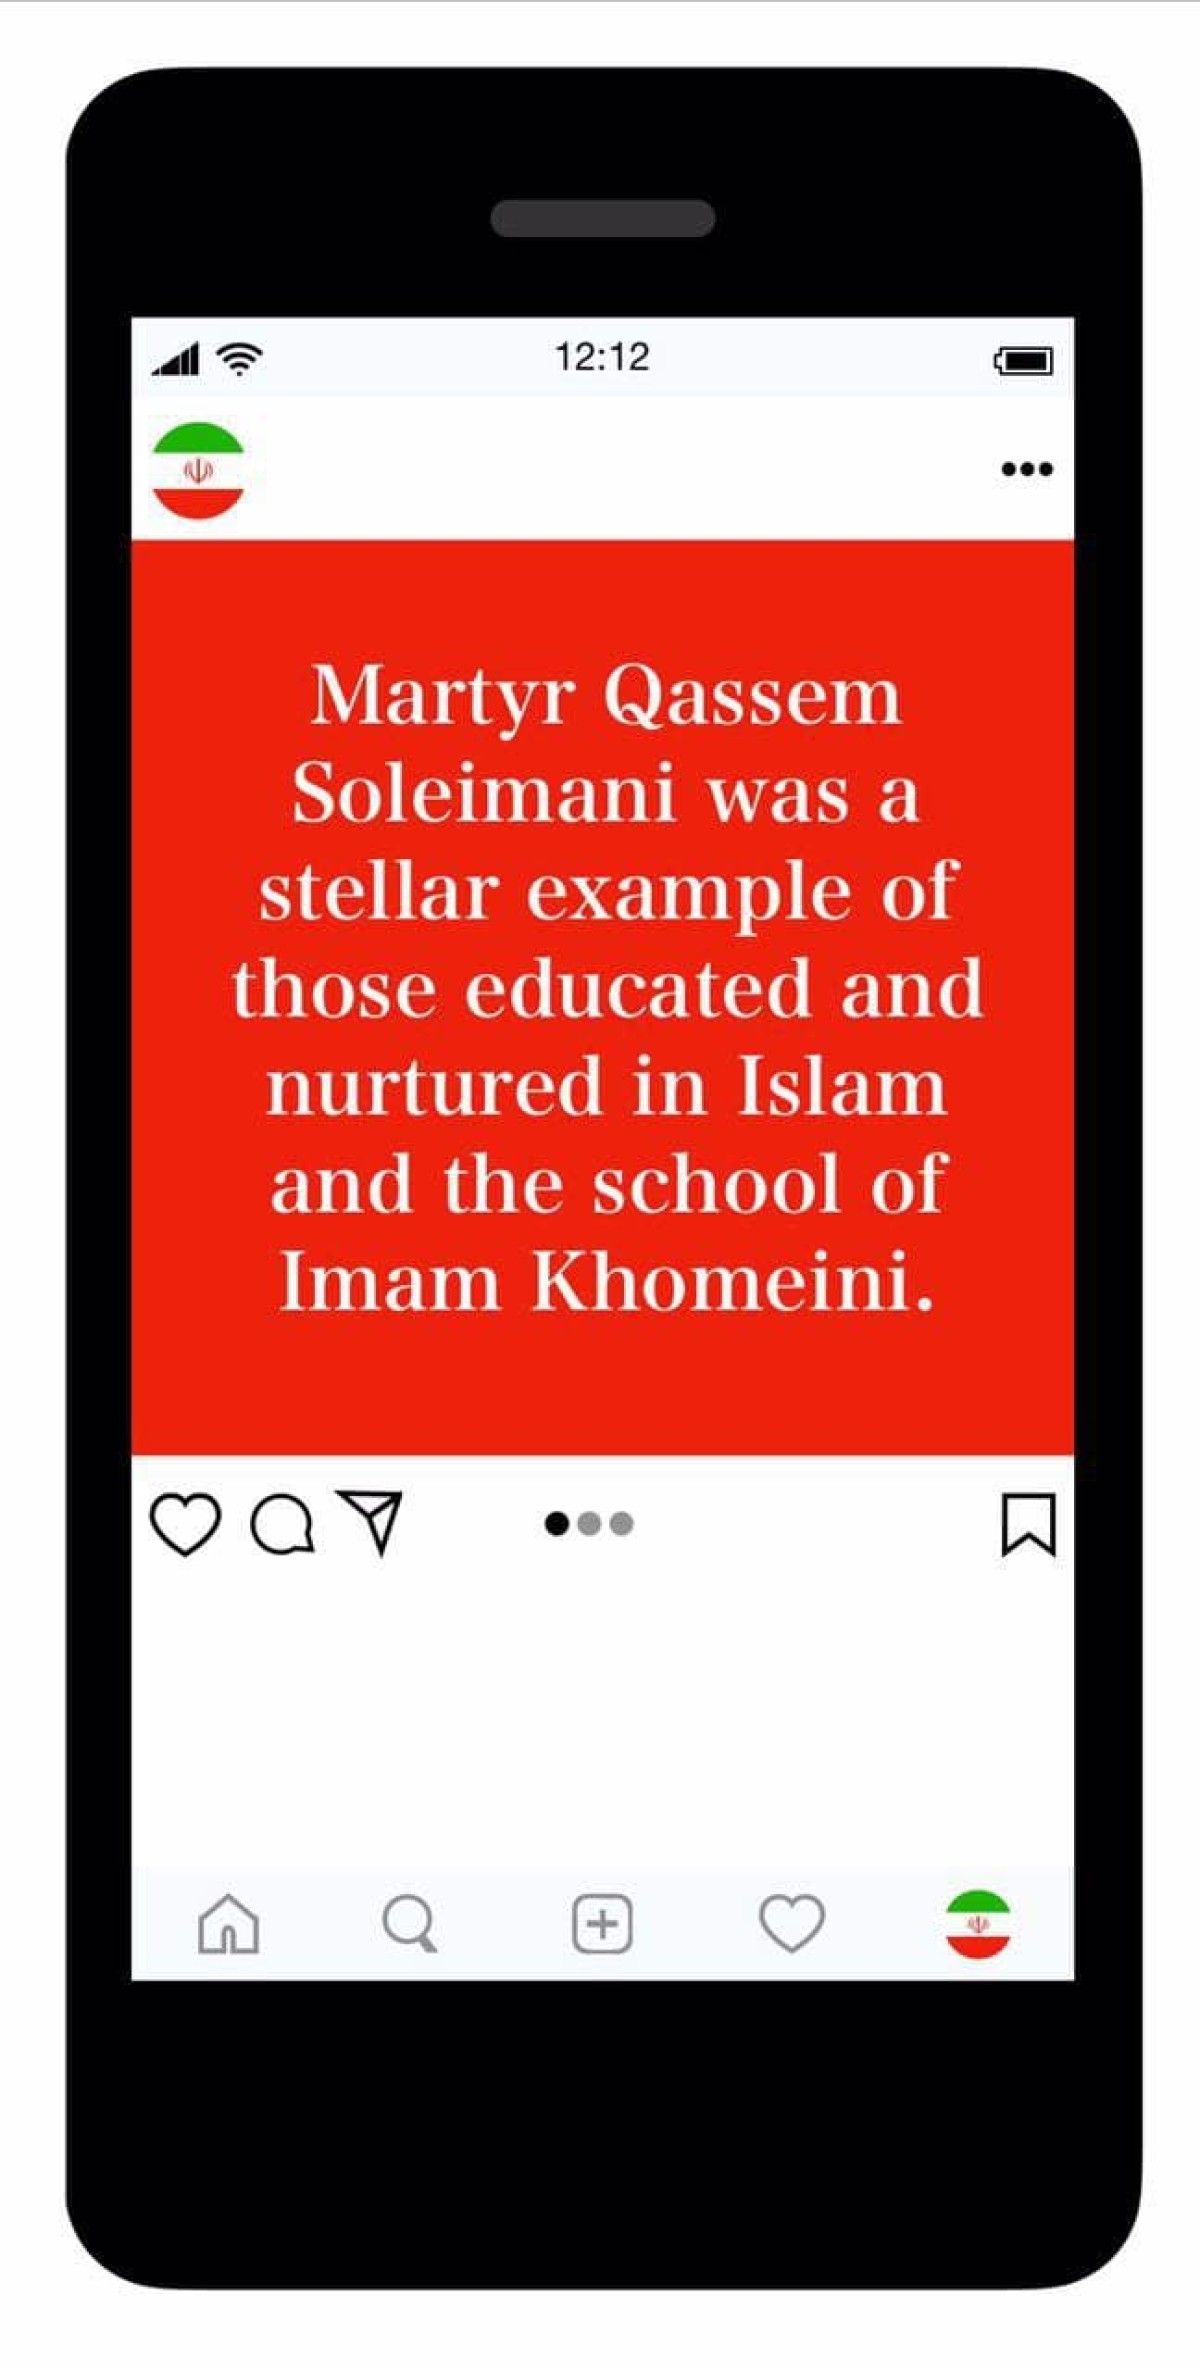  Martyr Qassem Soleimani was a stellar example of those educated and nurtured in Islam and the school of Imam Khomeini